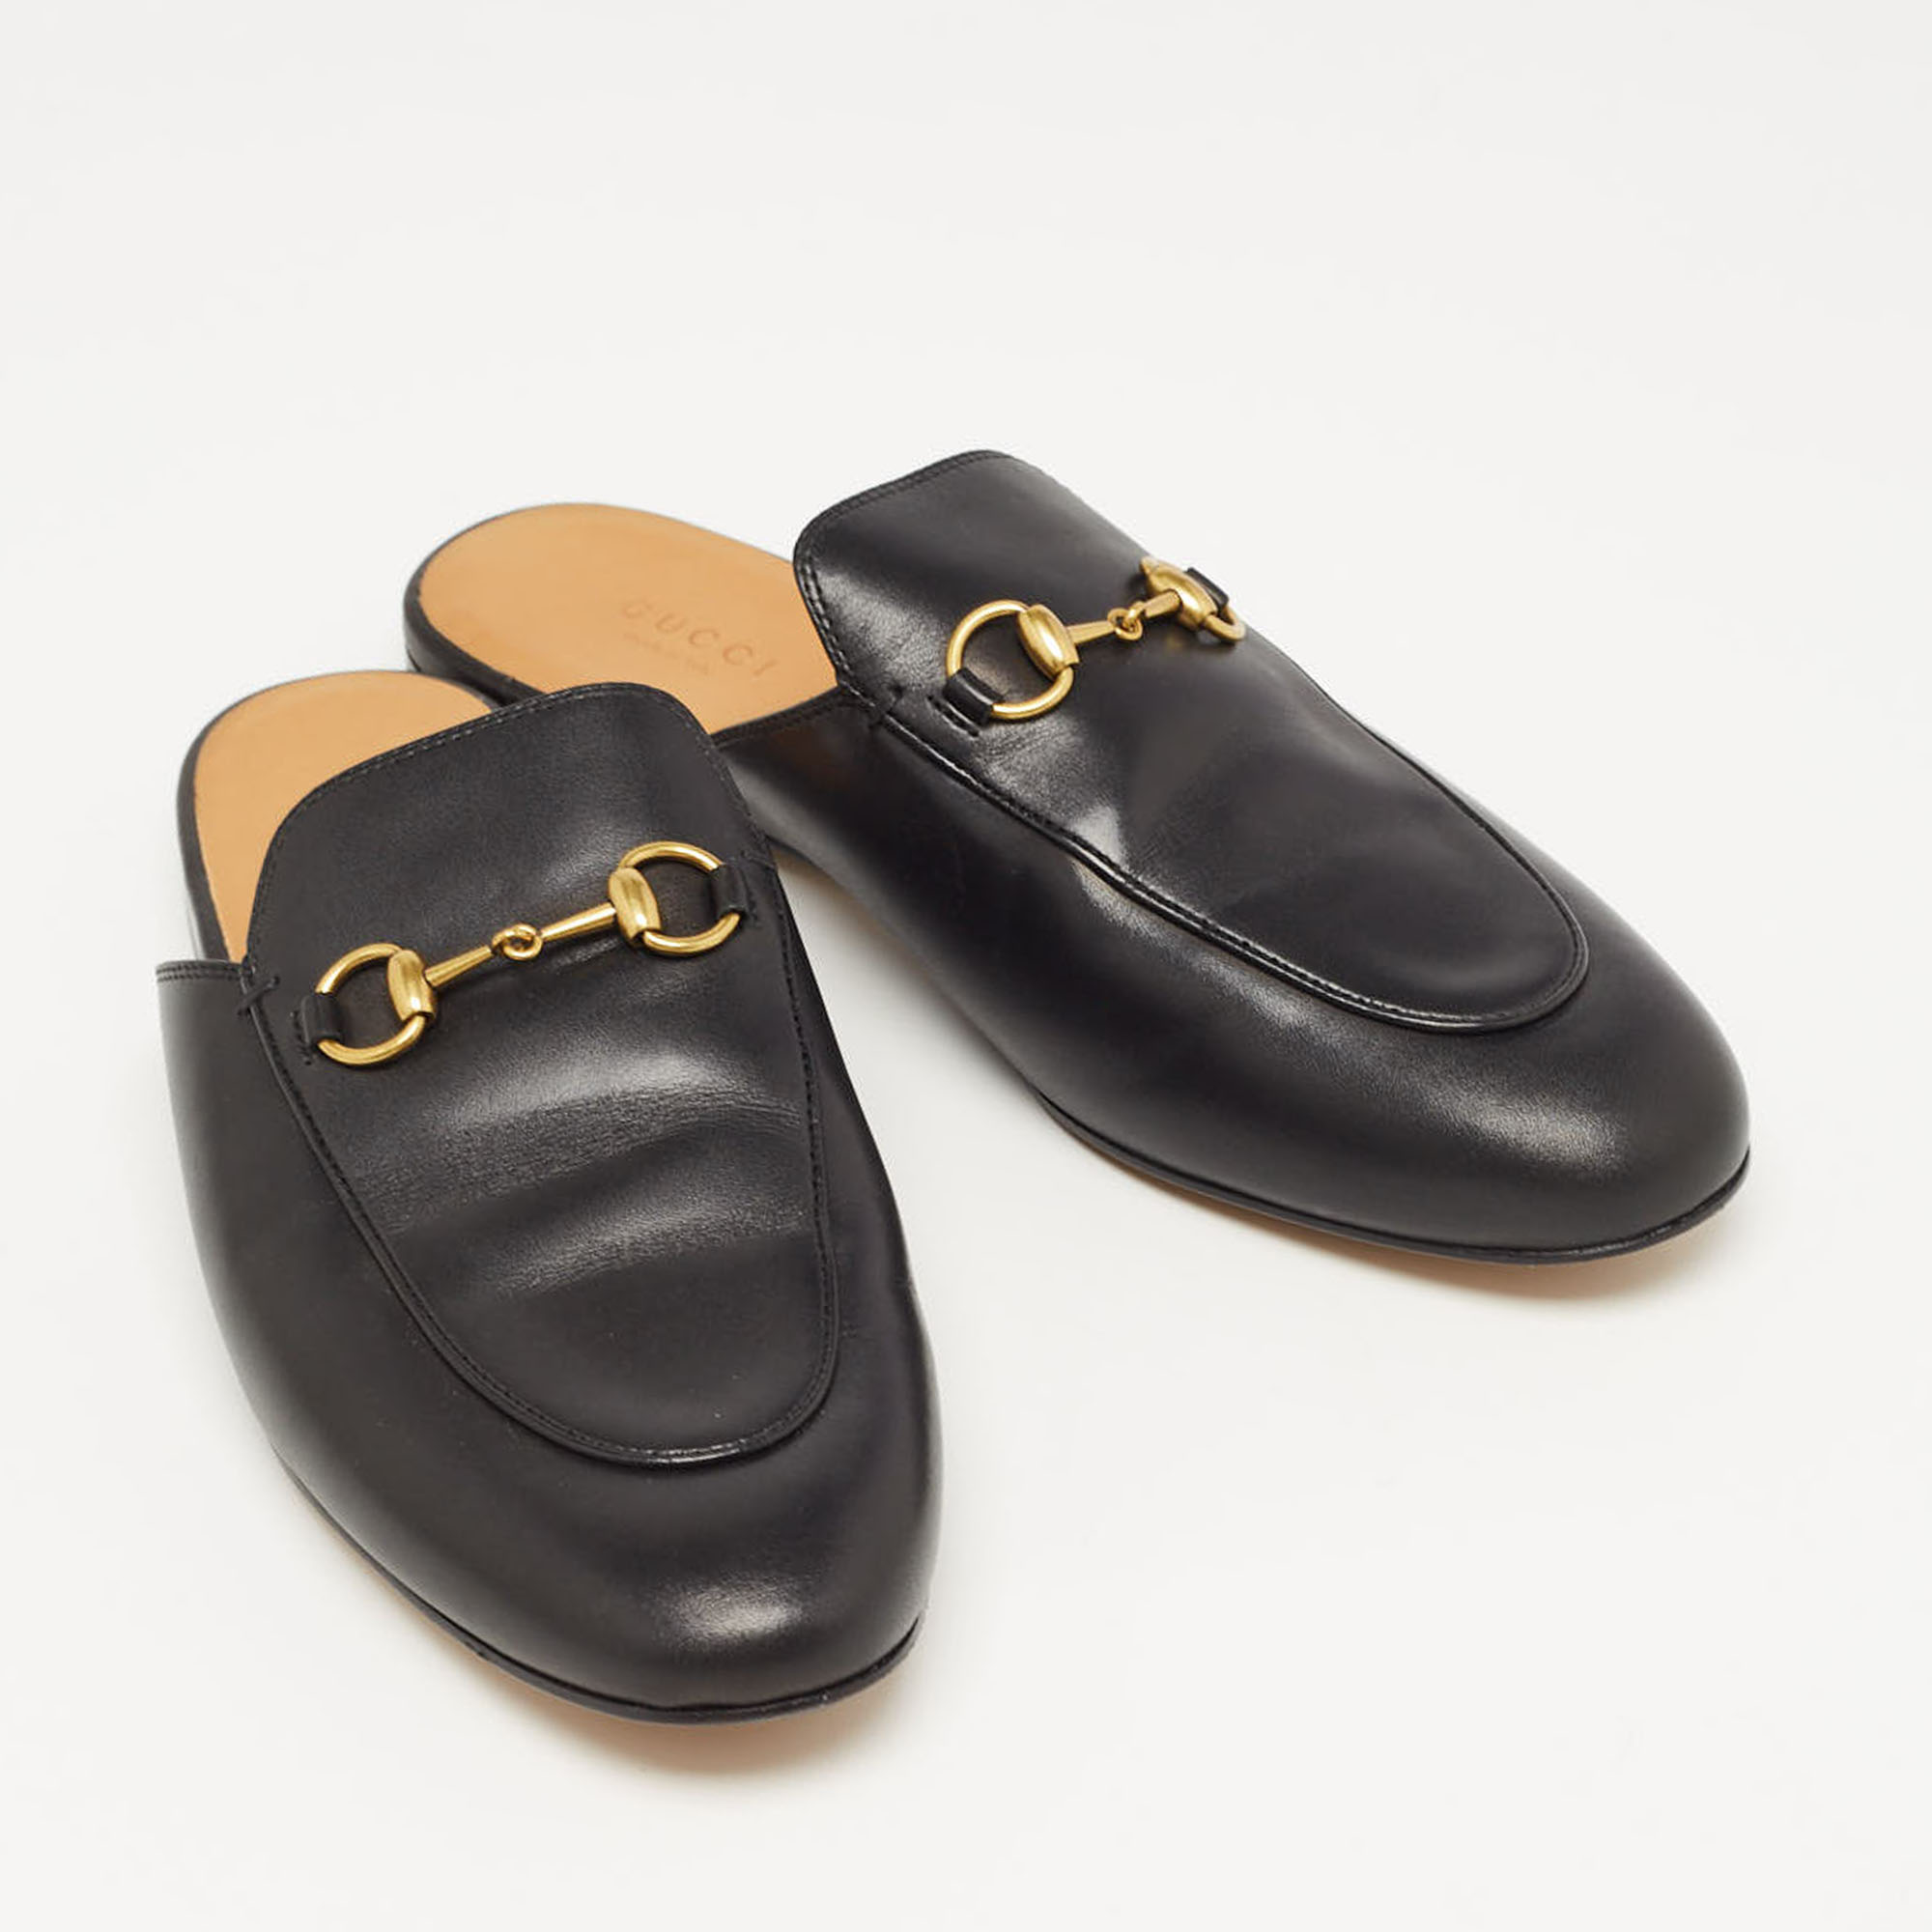 Gucci Black Leather Princetown Flat Mules Size 40